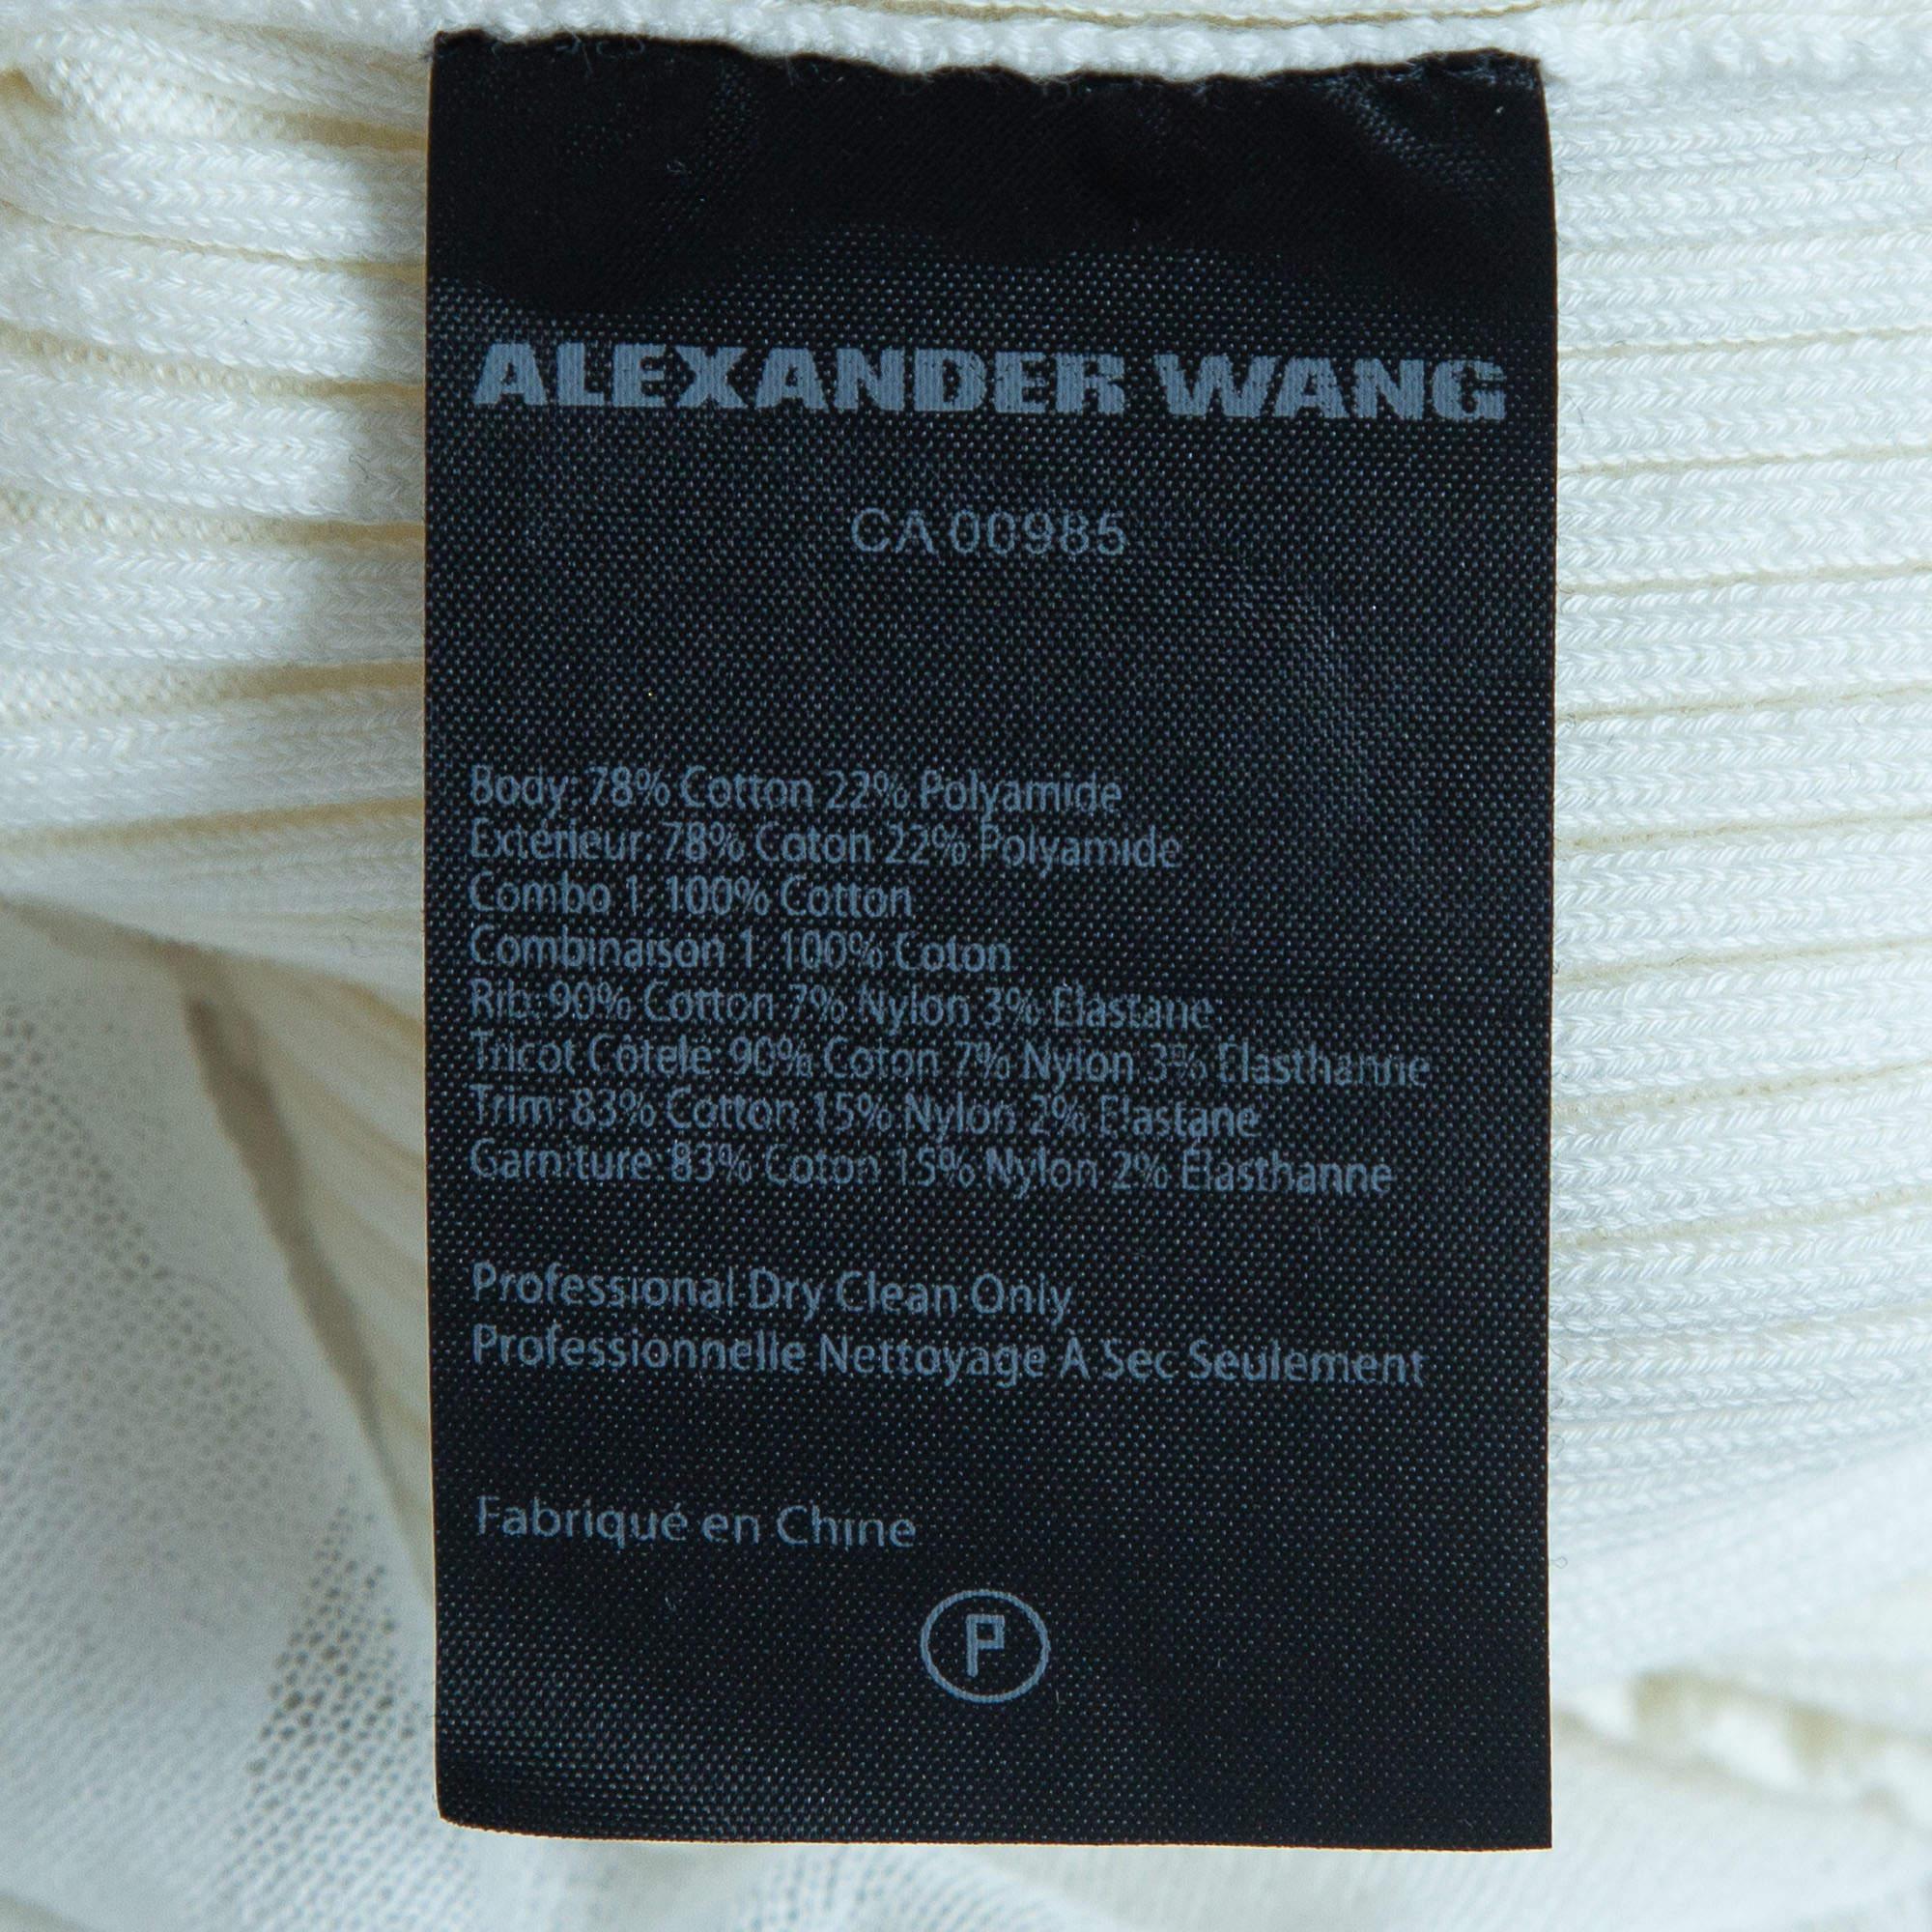 Women's Alexander Wang Off-White Cotton knit Sheer Overlay Top L For Sale